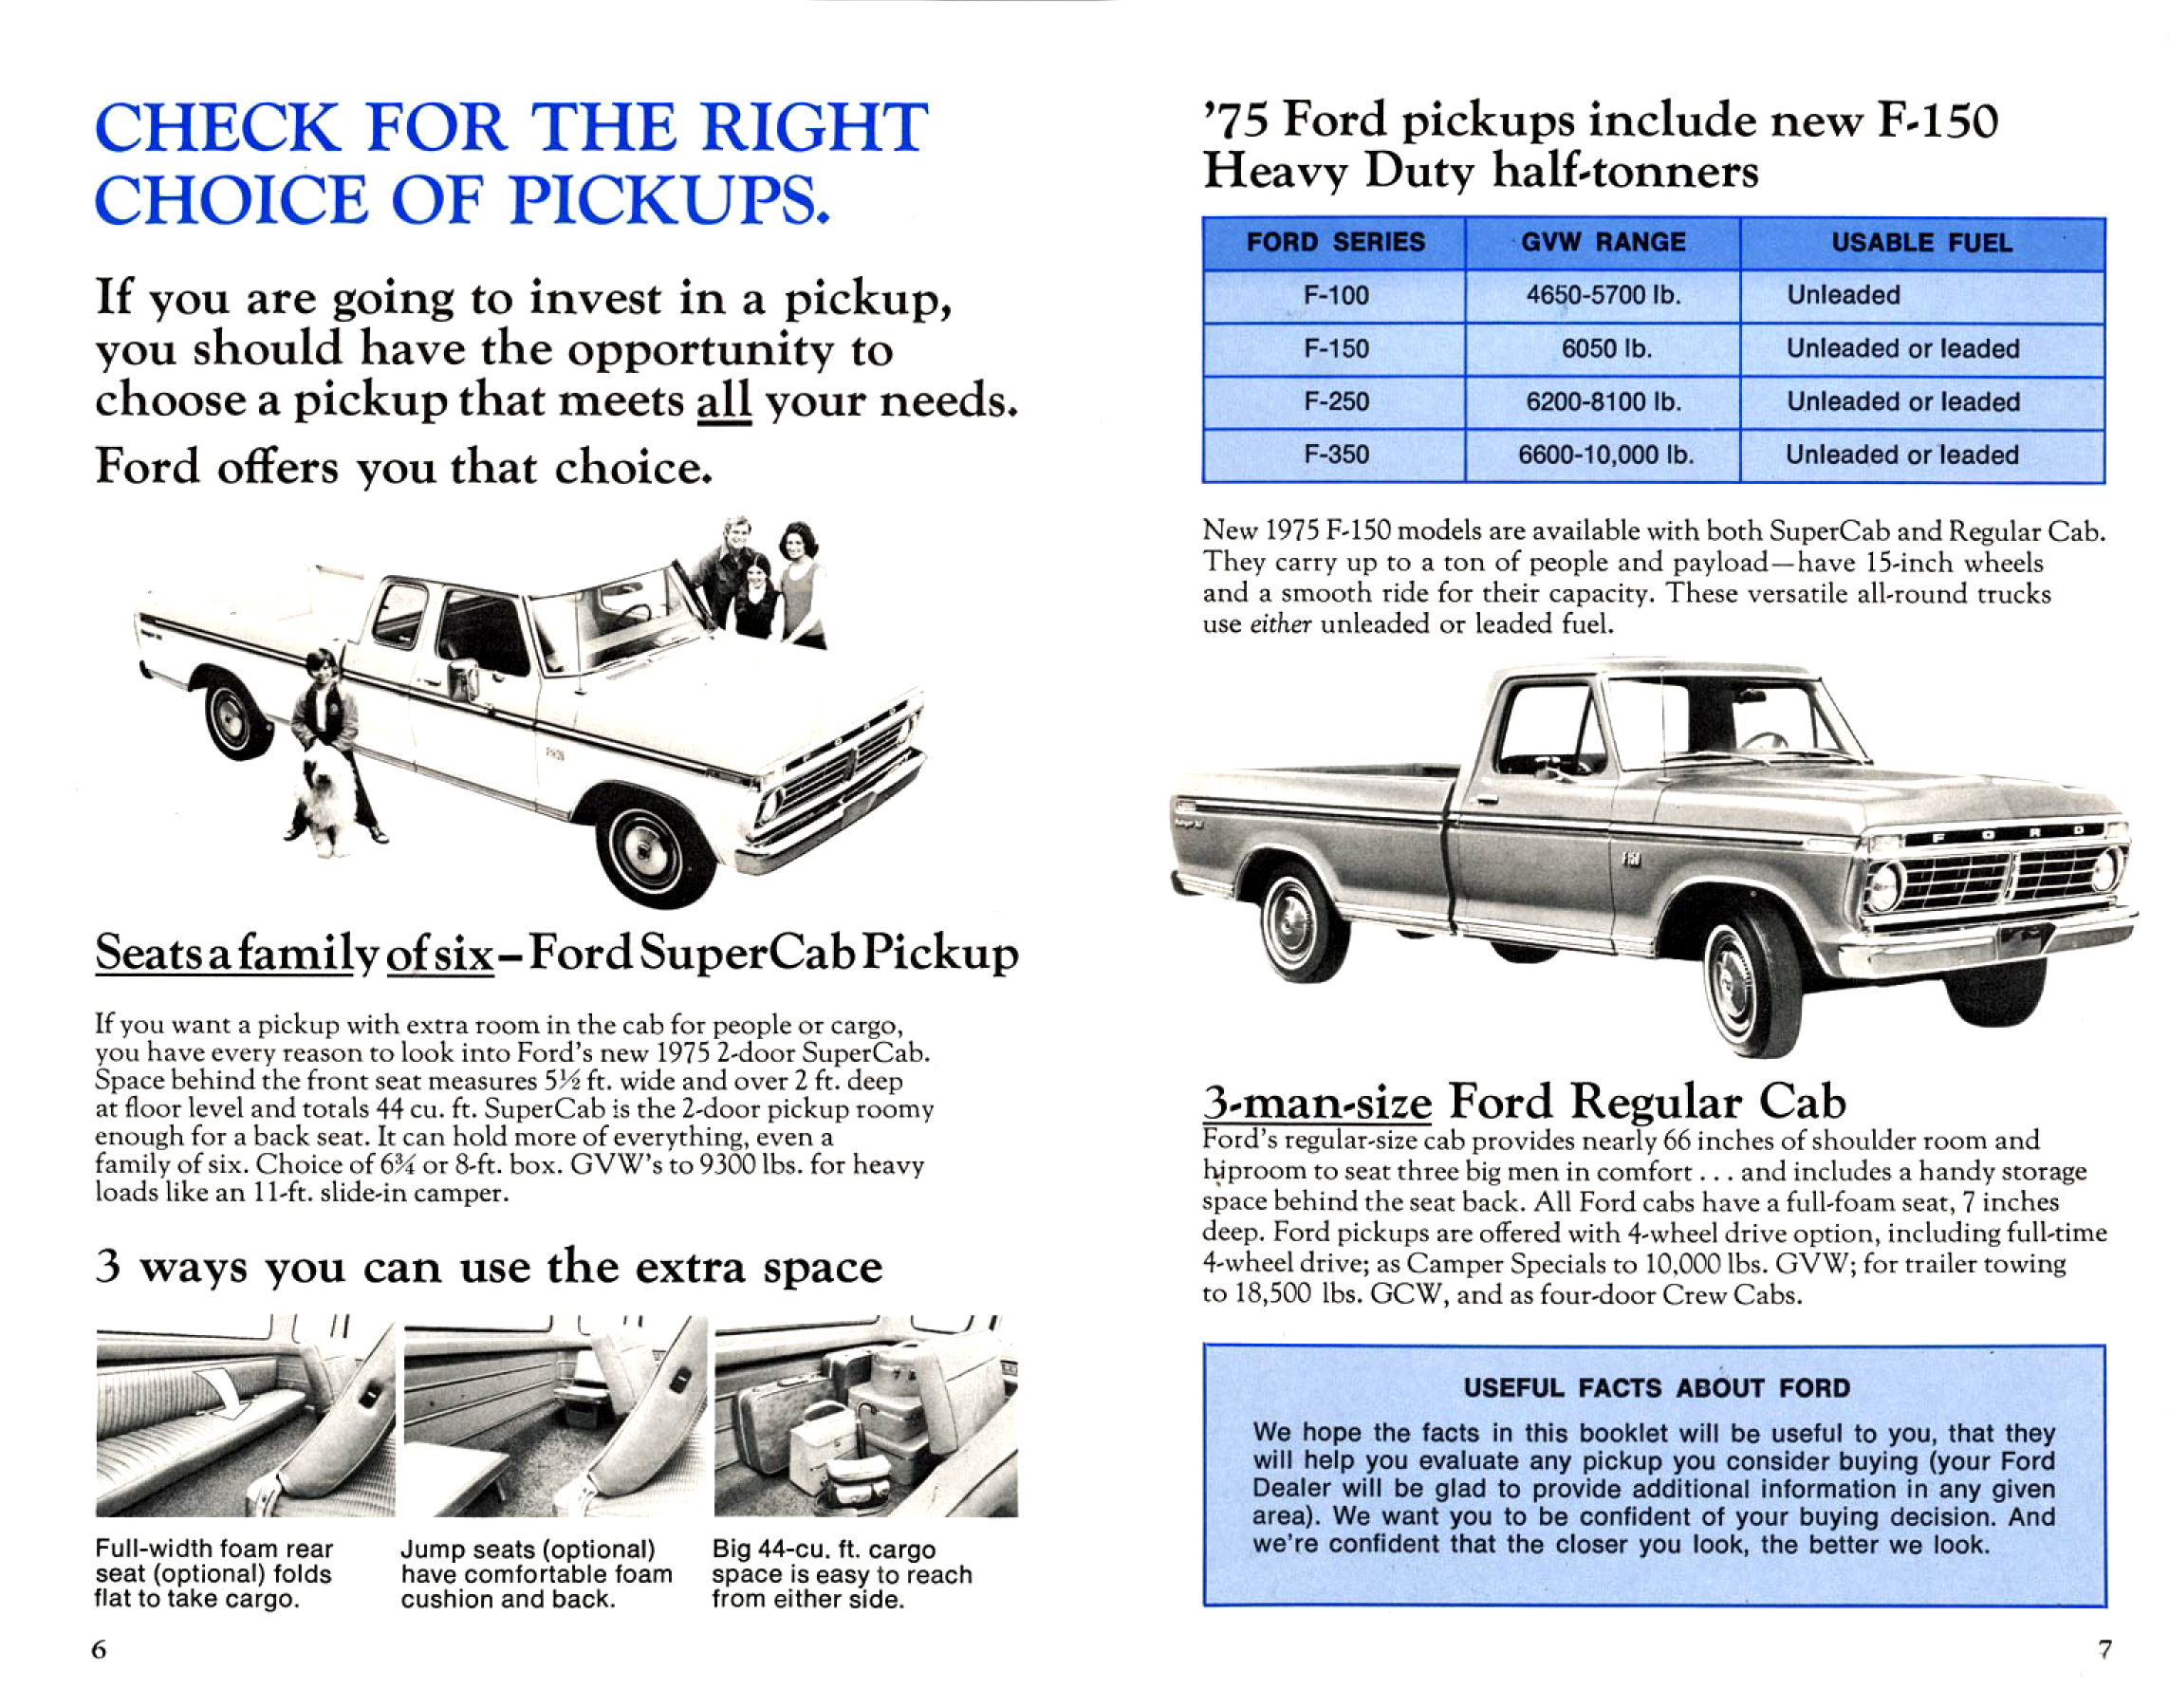 1975 Ford Truck Look-06-07